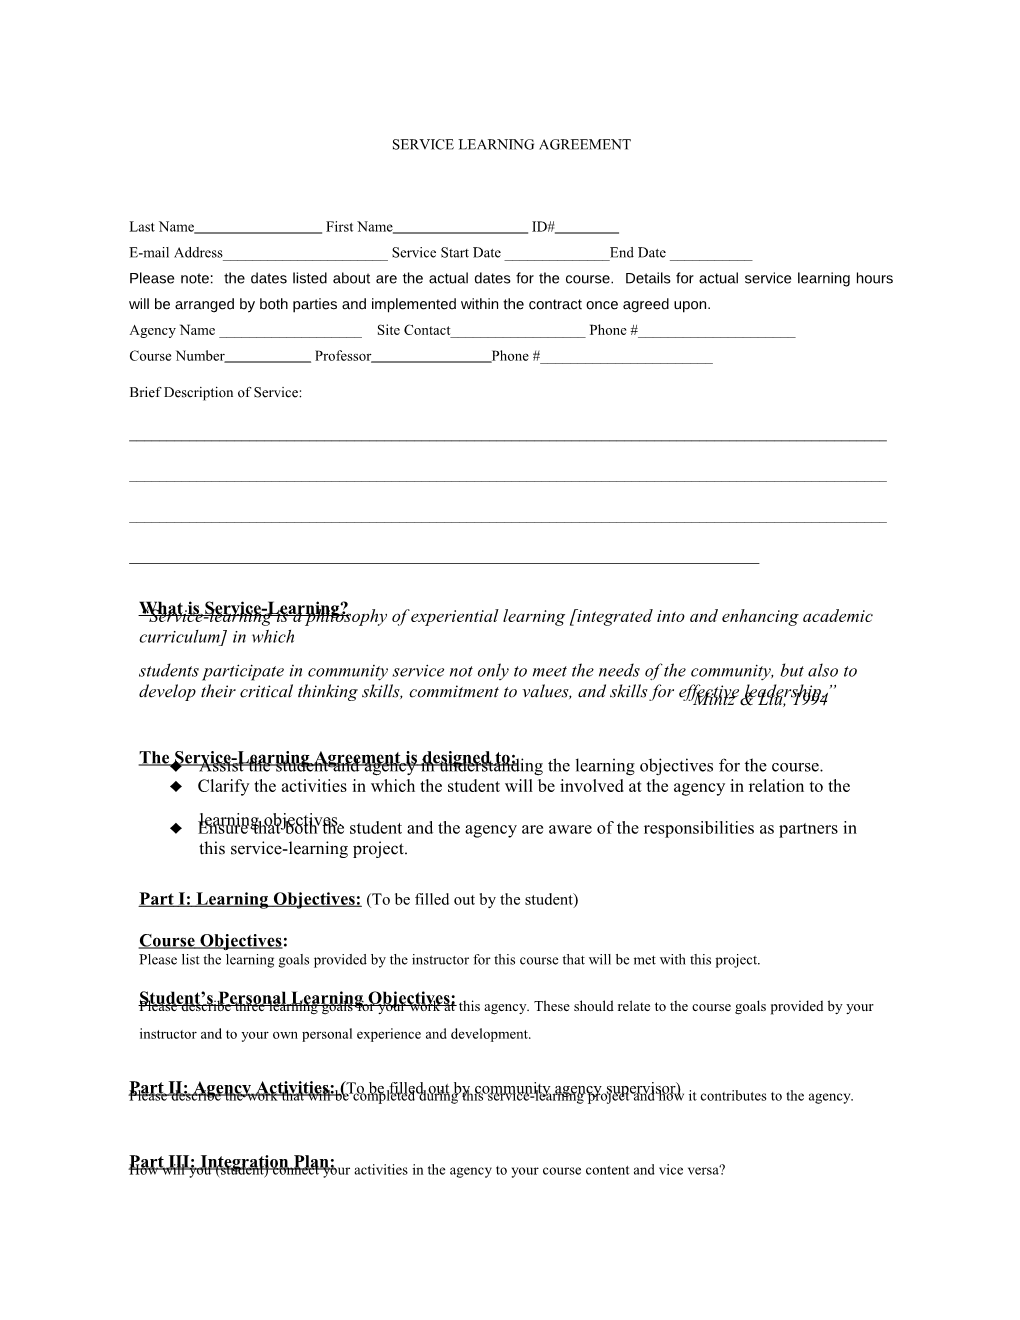 Service Learning Contract